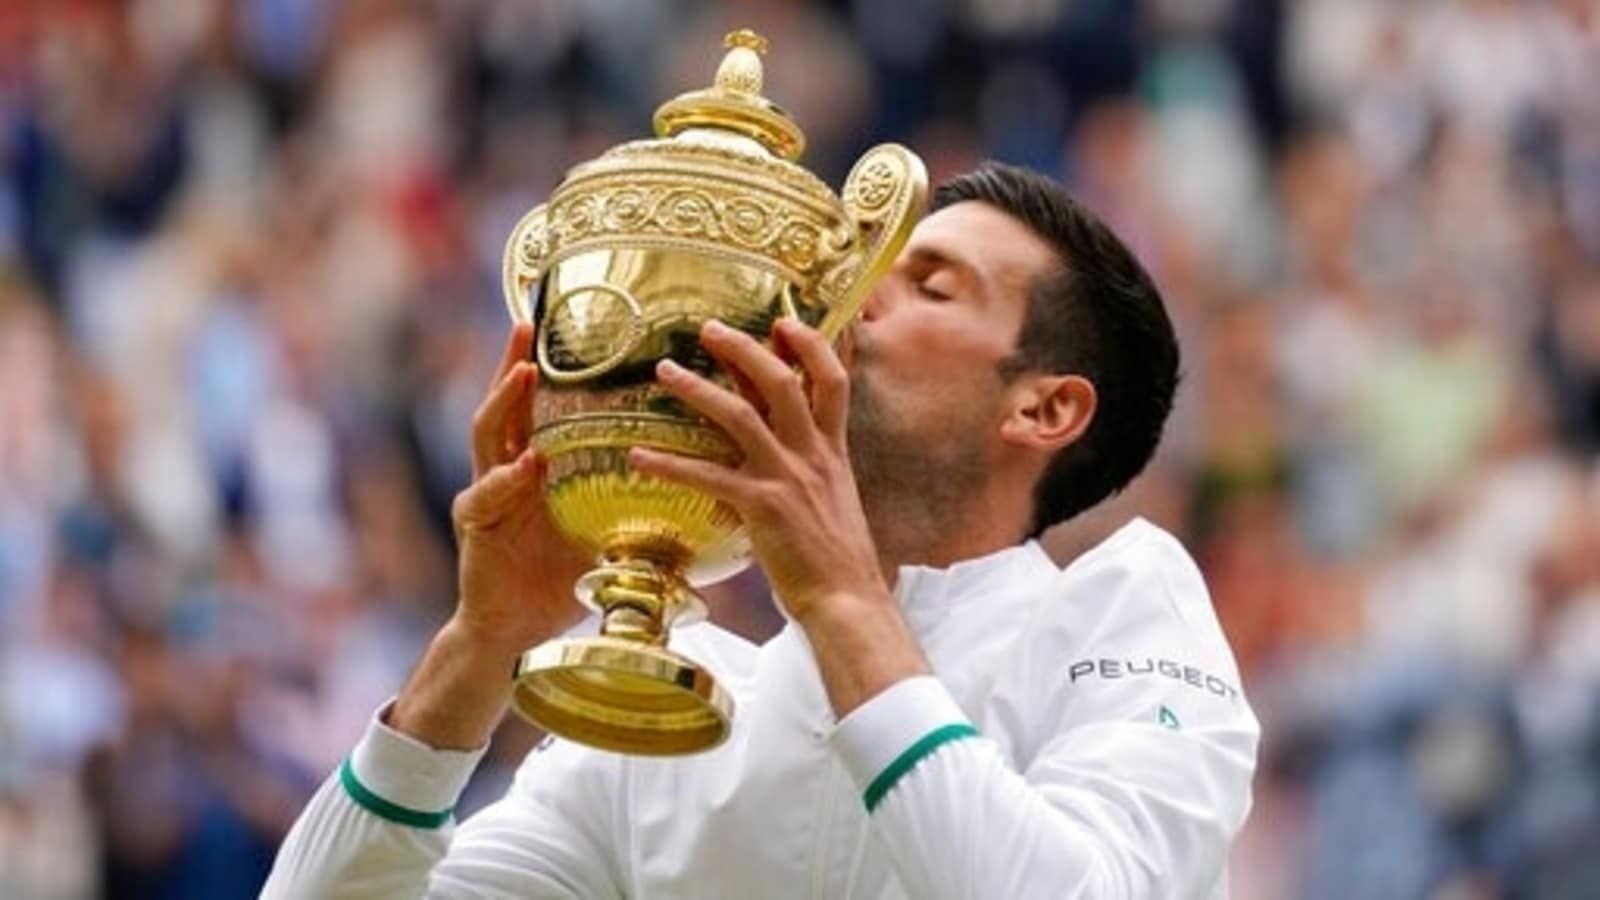 Novak Djokovic wins Wimbledon 2021 All the numbers and records about